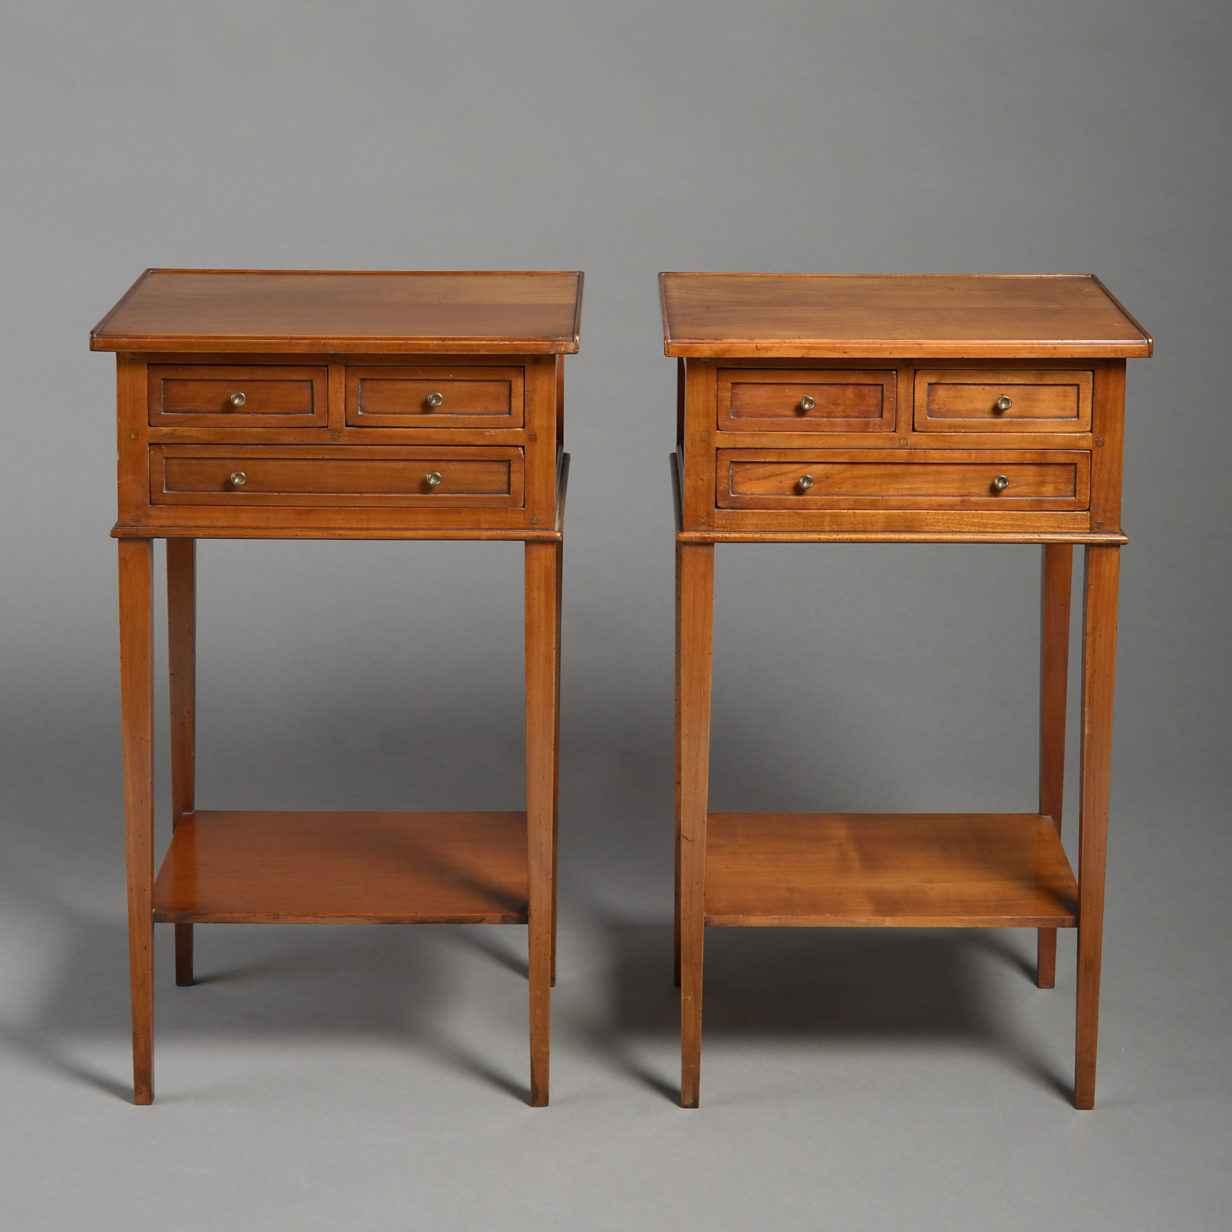 A pair of bedside tables in the directoire manner